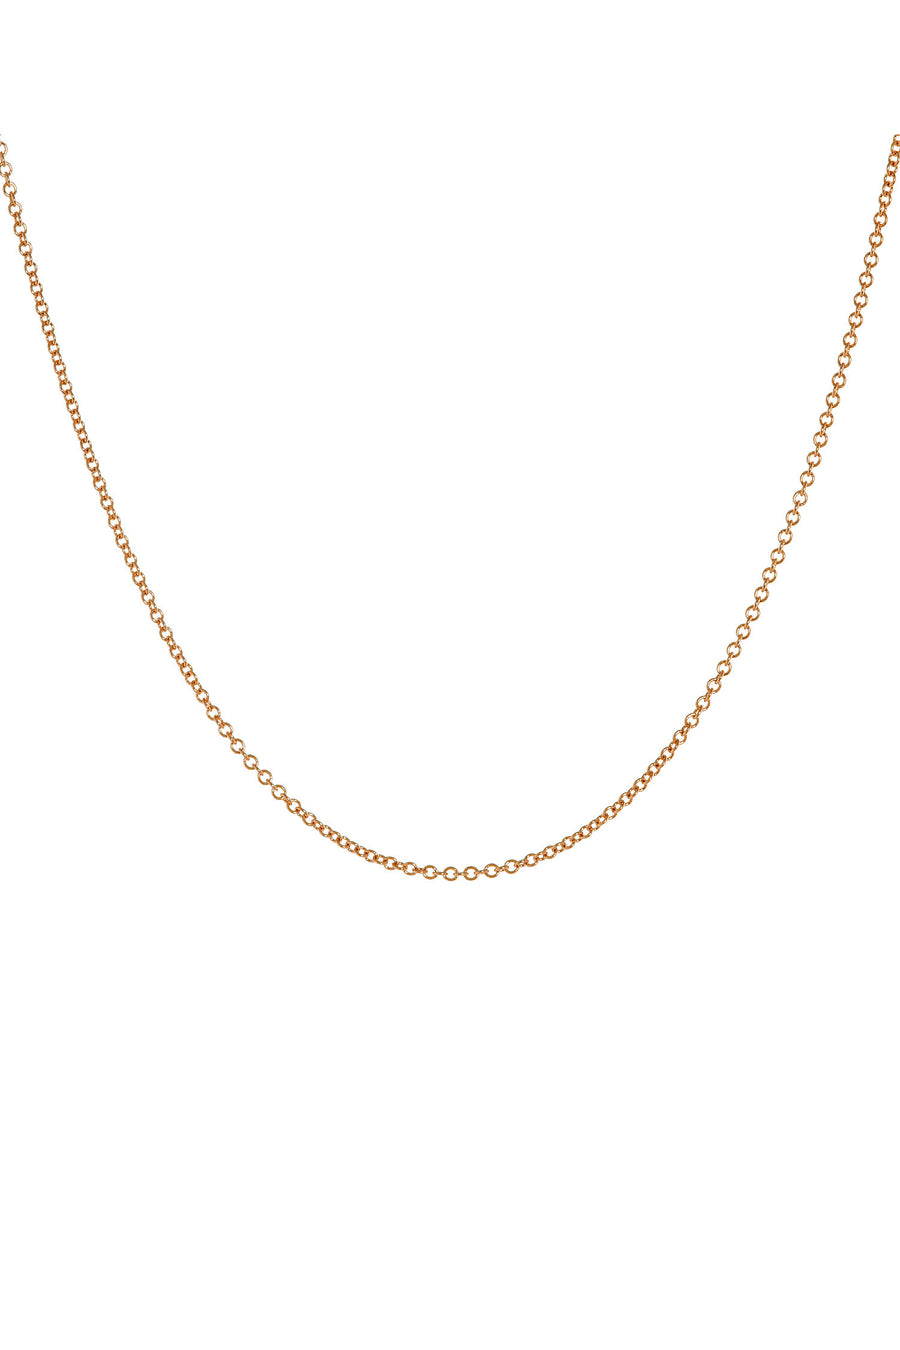 2.0mm Cable Chain in 14k Gold | 18"